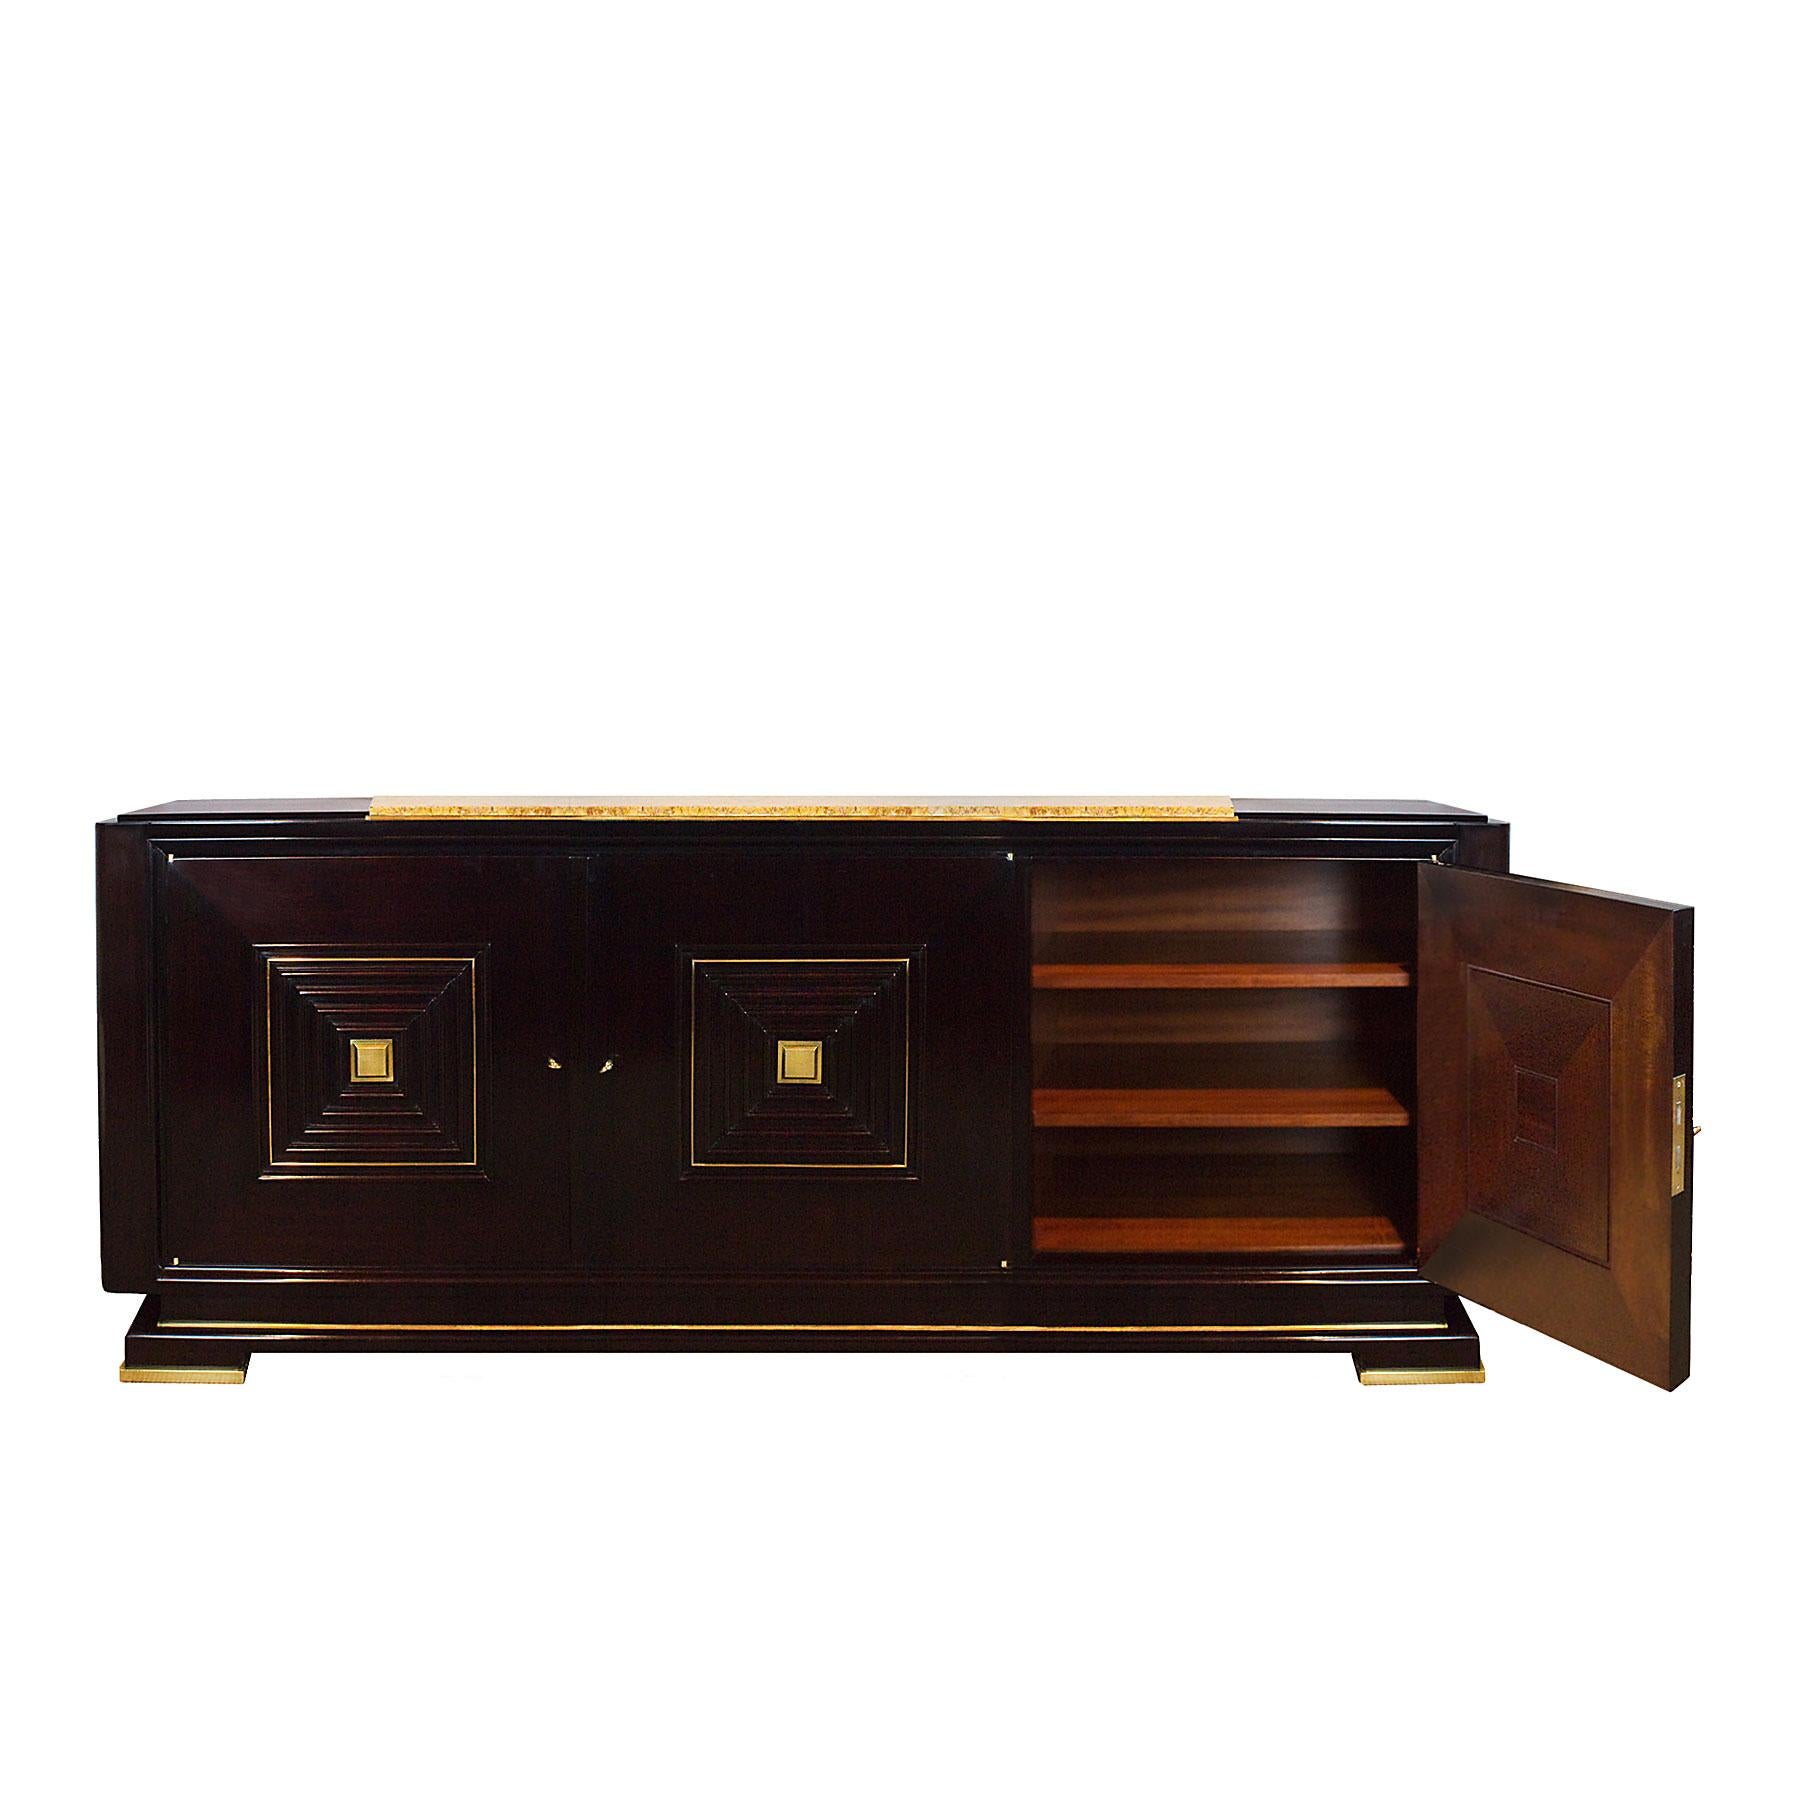 Mid-20th Century Mid-Century Modern Sideboard in the Style of Maxime Old, Mahogany, Brass -France For Sale